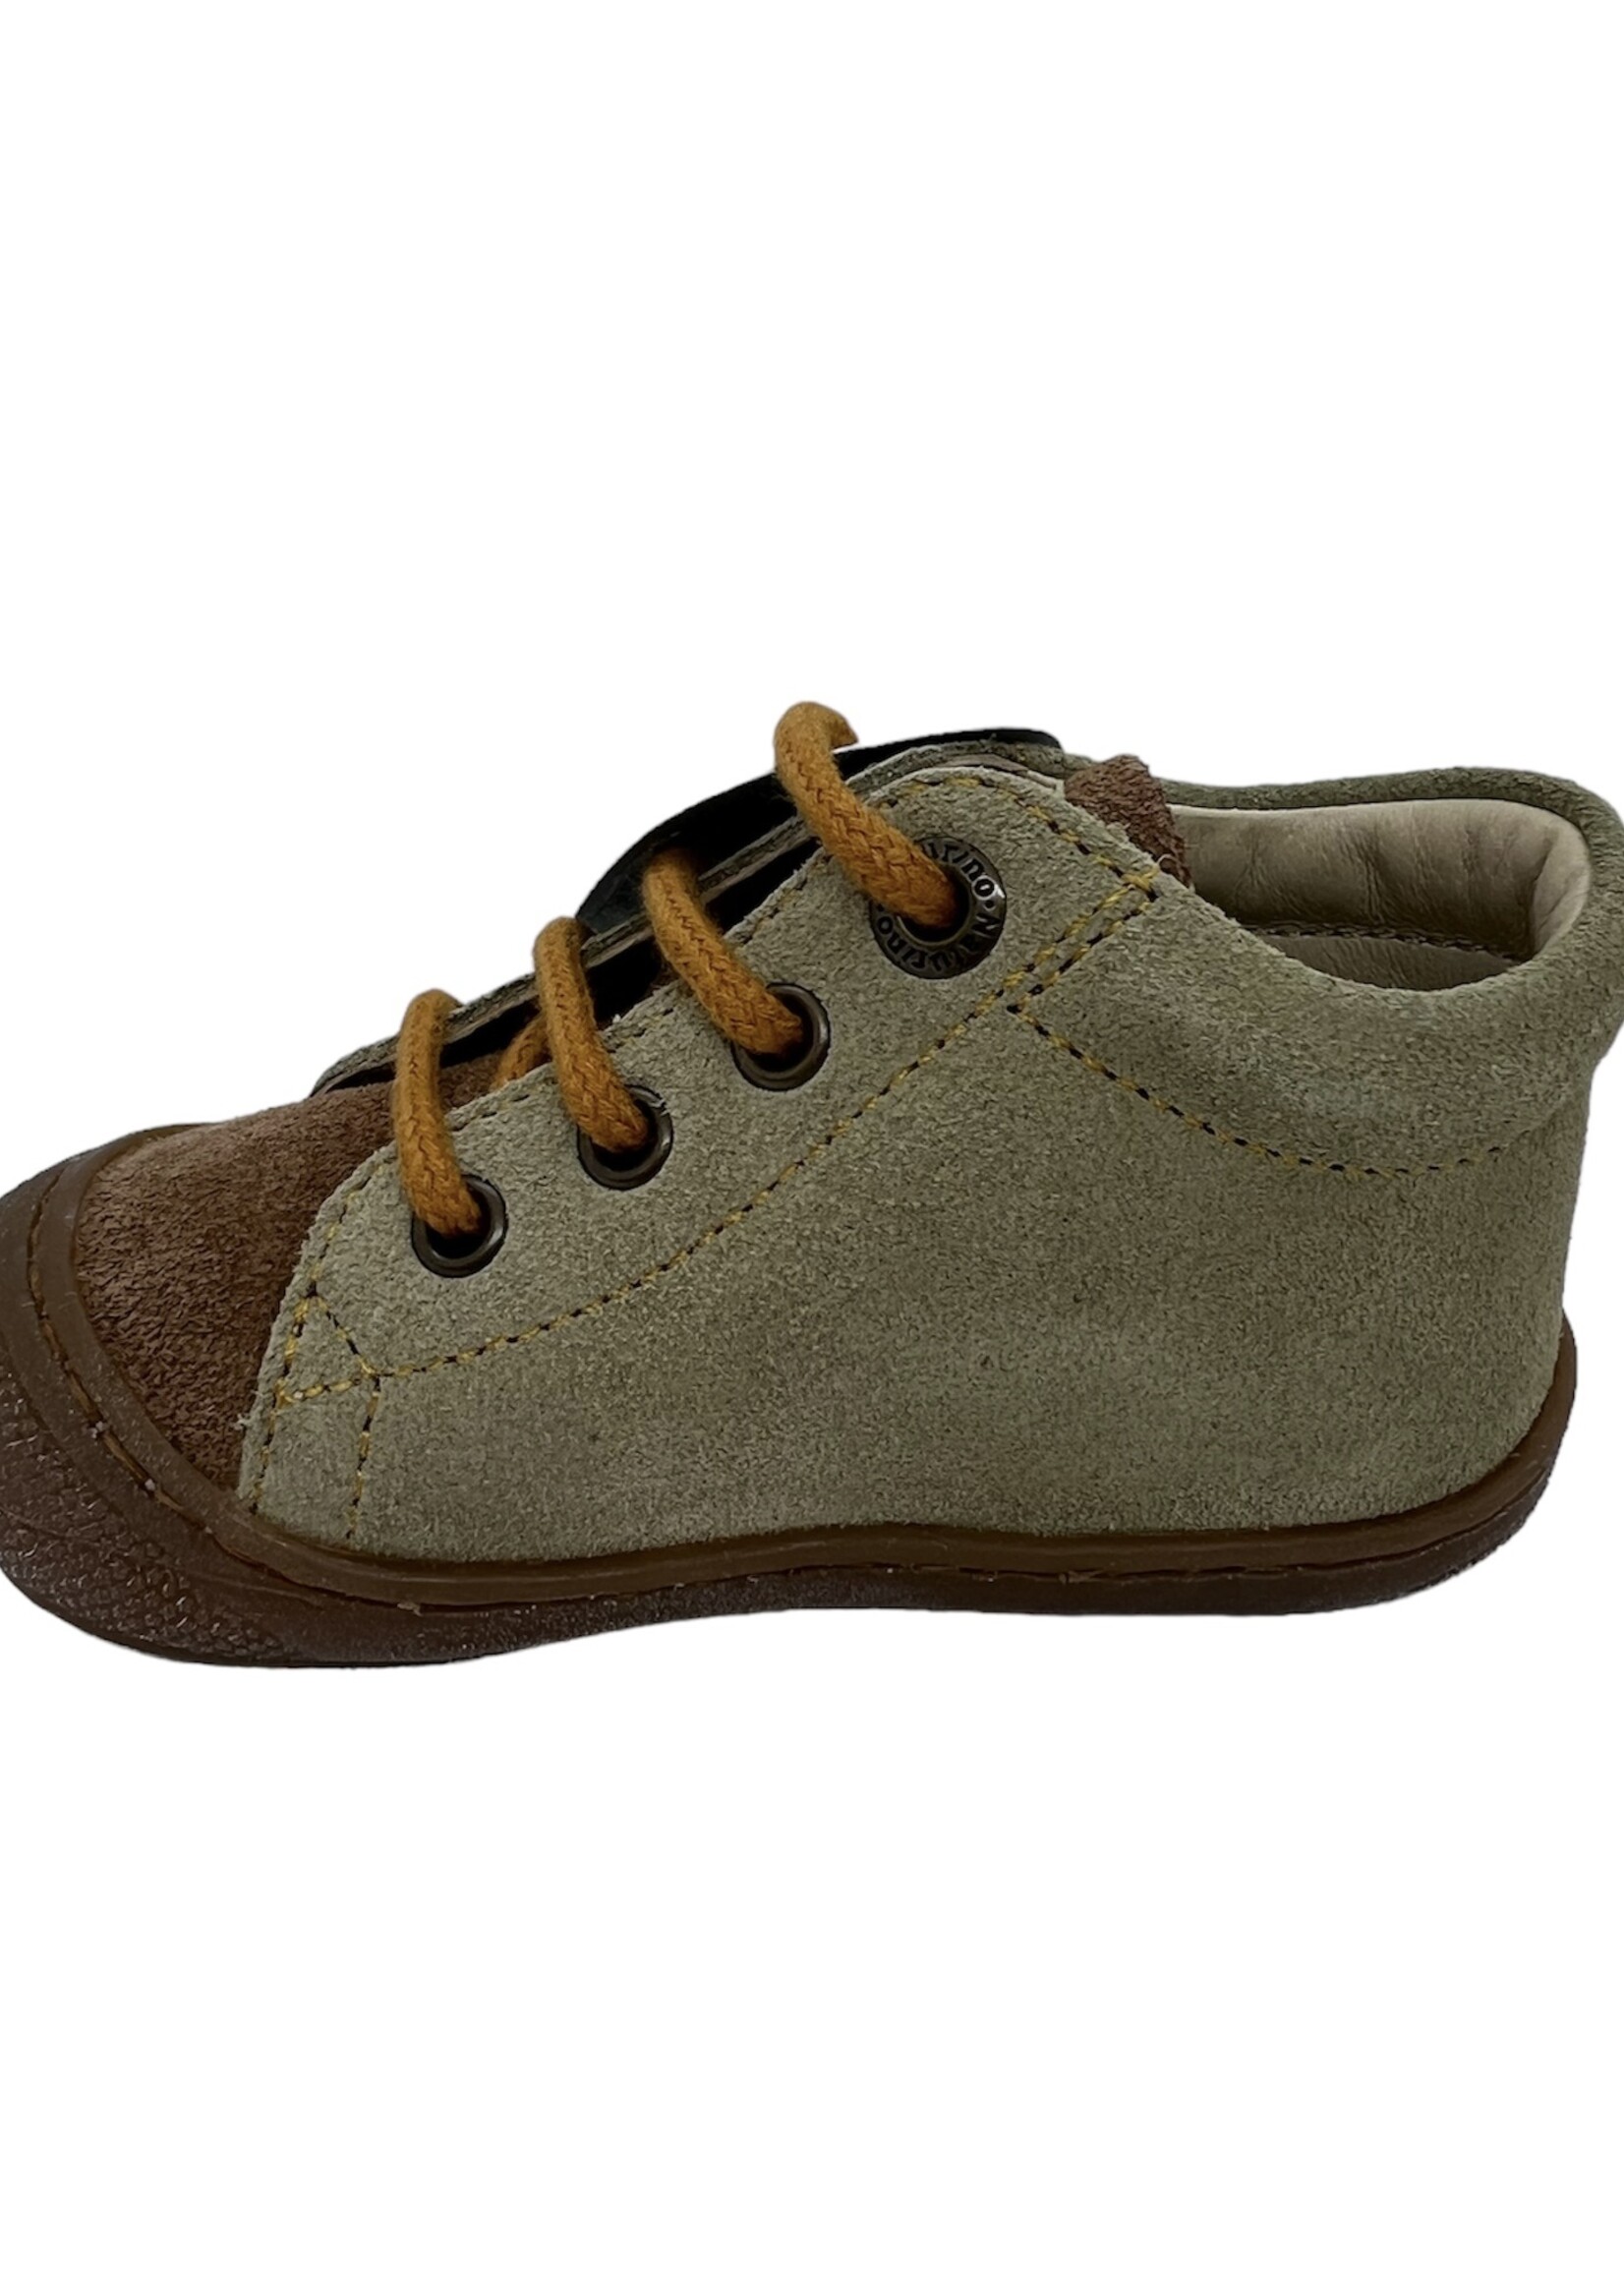 Naturino cocoon suede sole honey brown stone